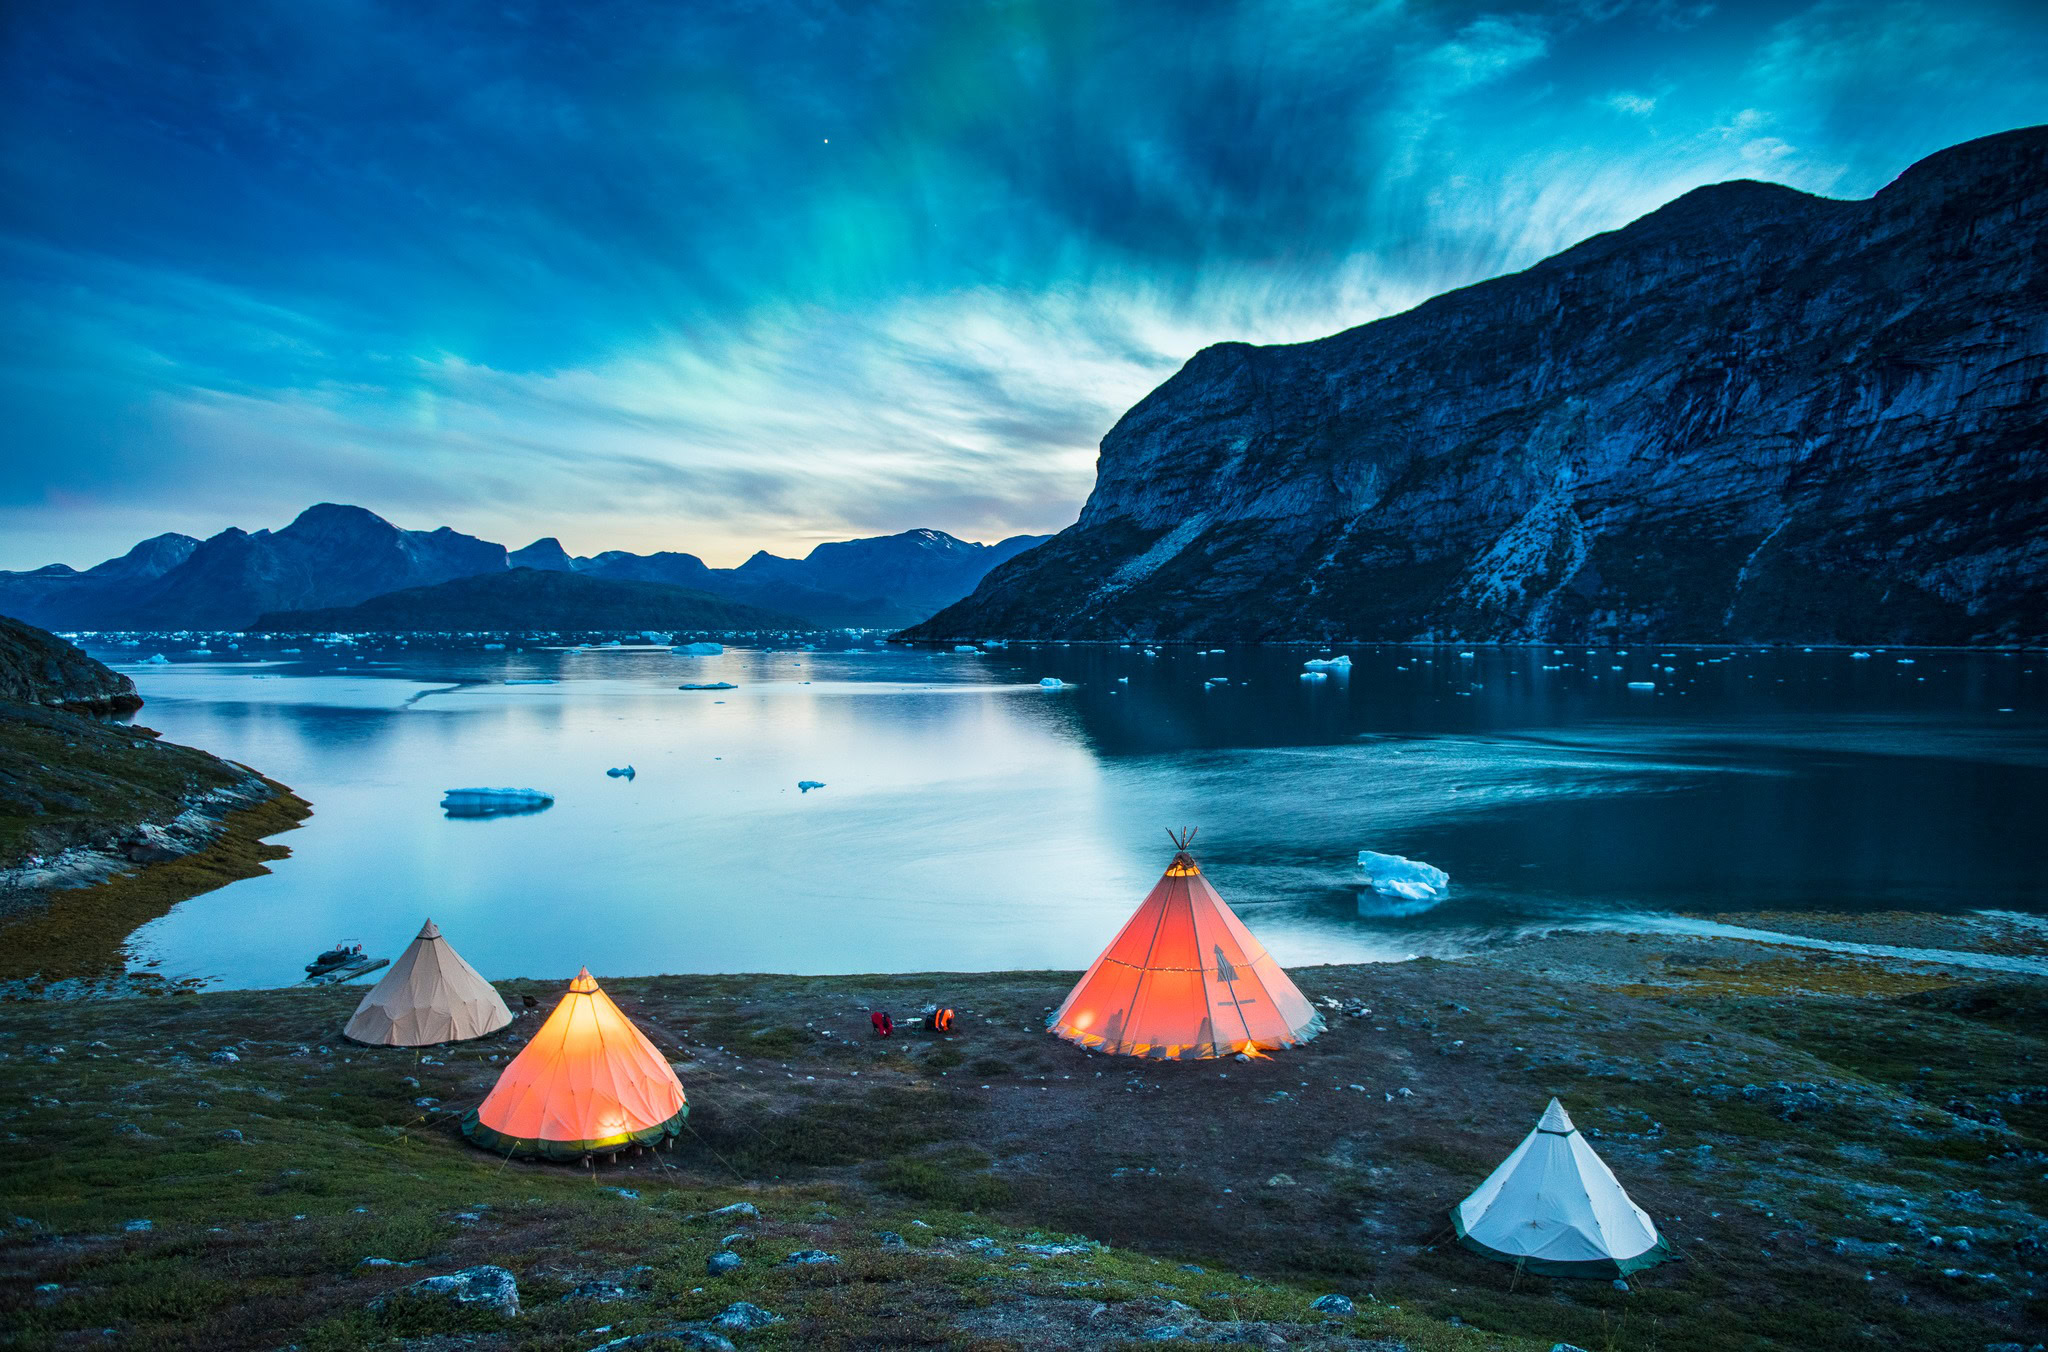 Colorful tents in a camp to shore- Nomad Greenland photo archive